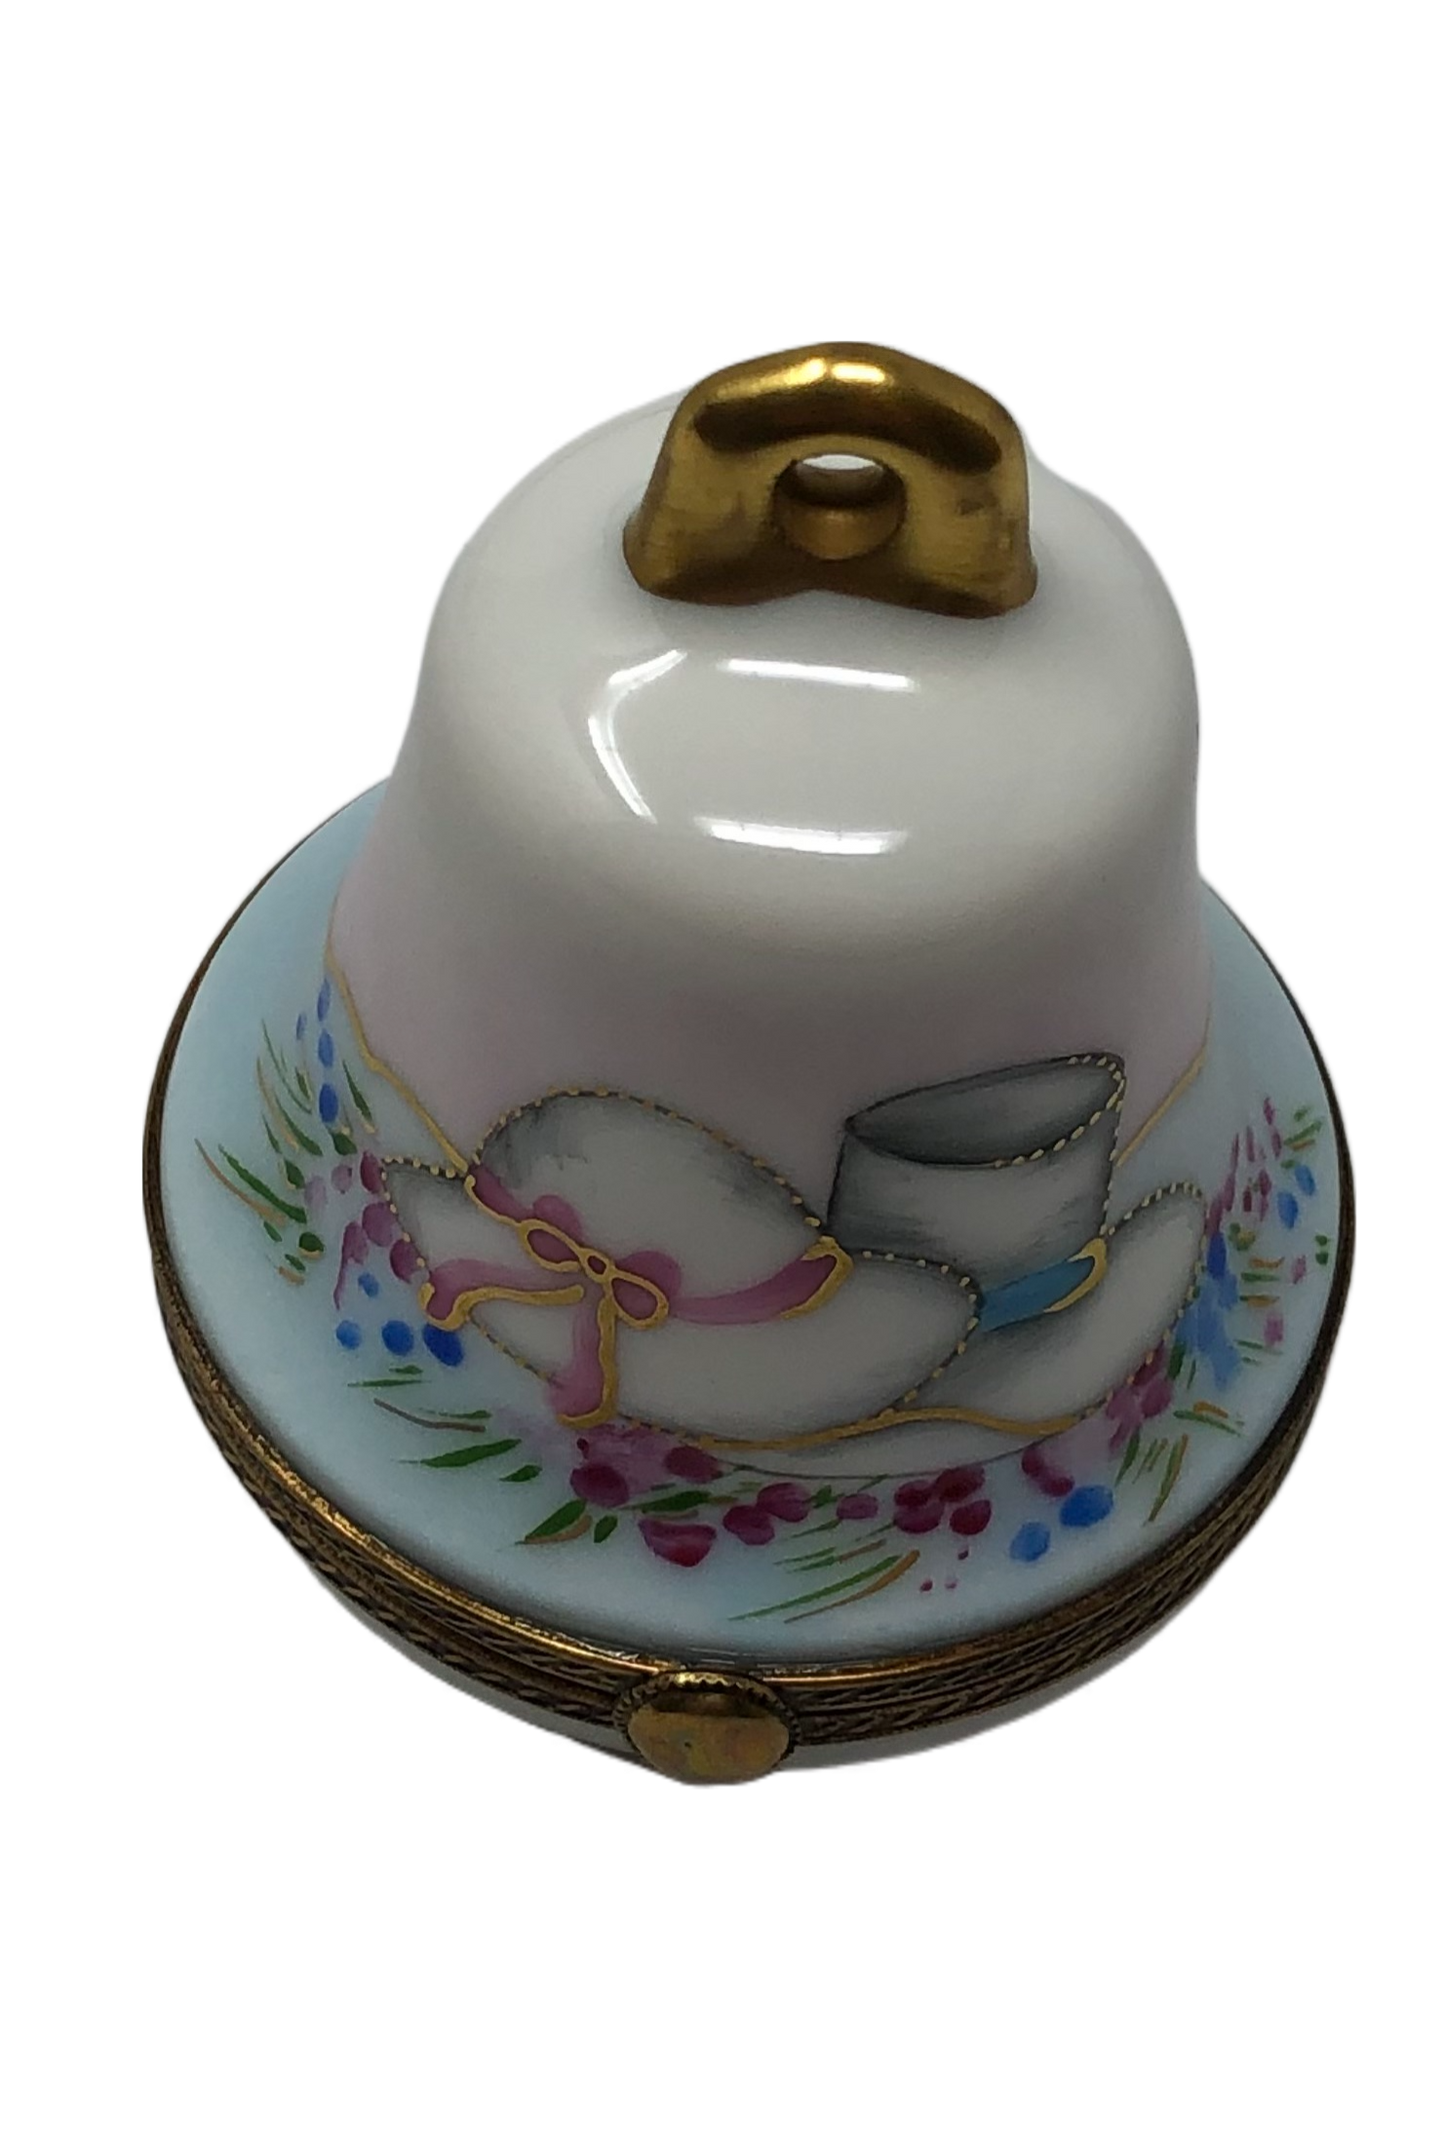 Hats Off to Love - Bell Shaped Limoges Box